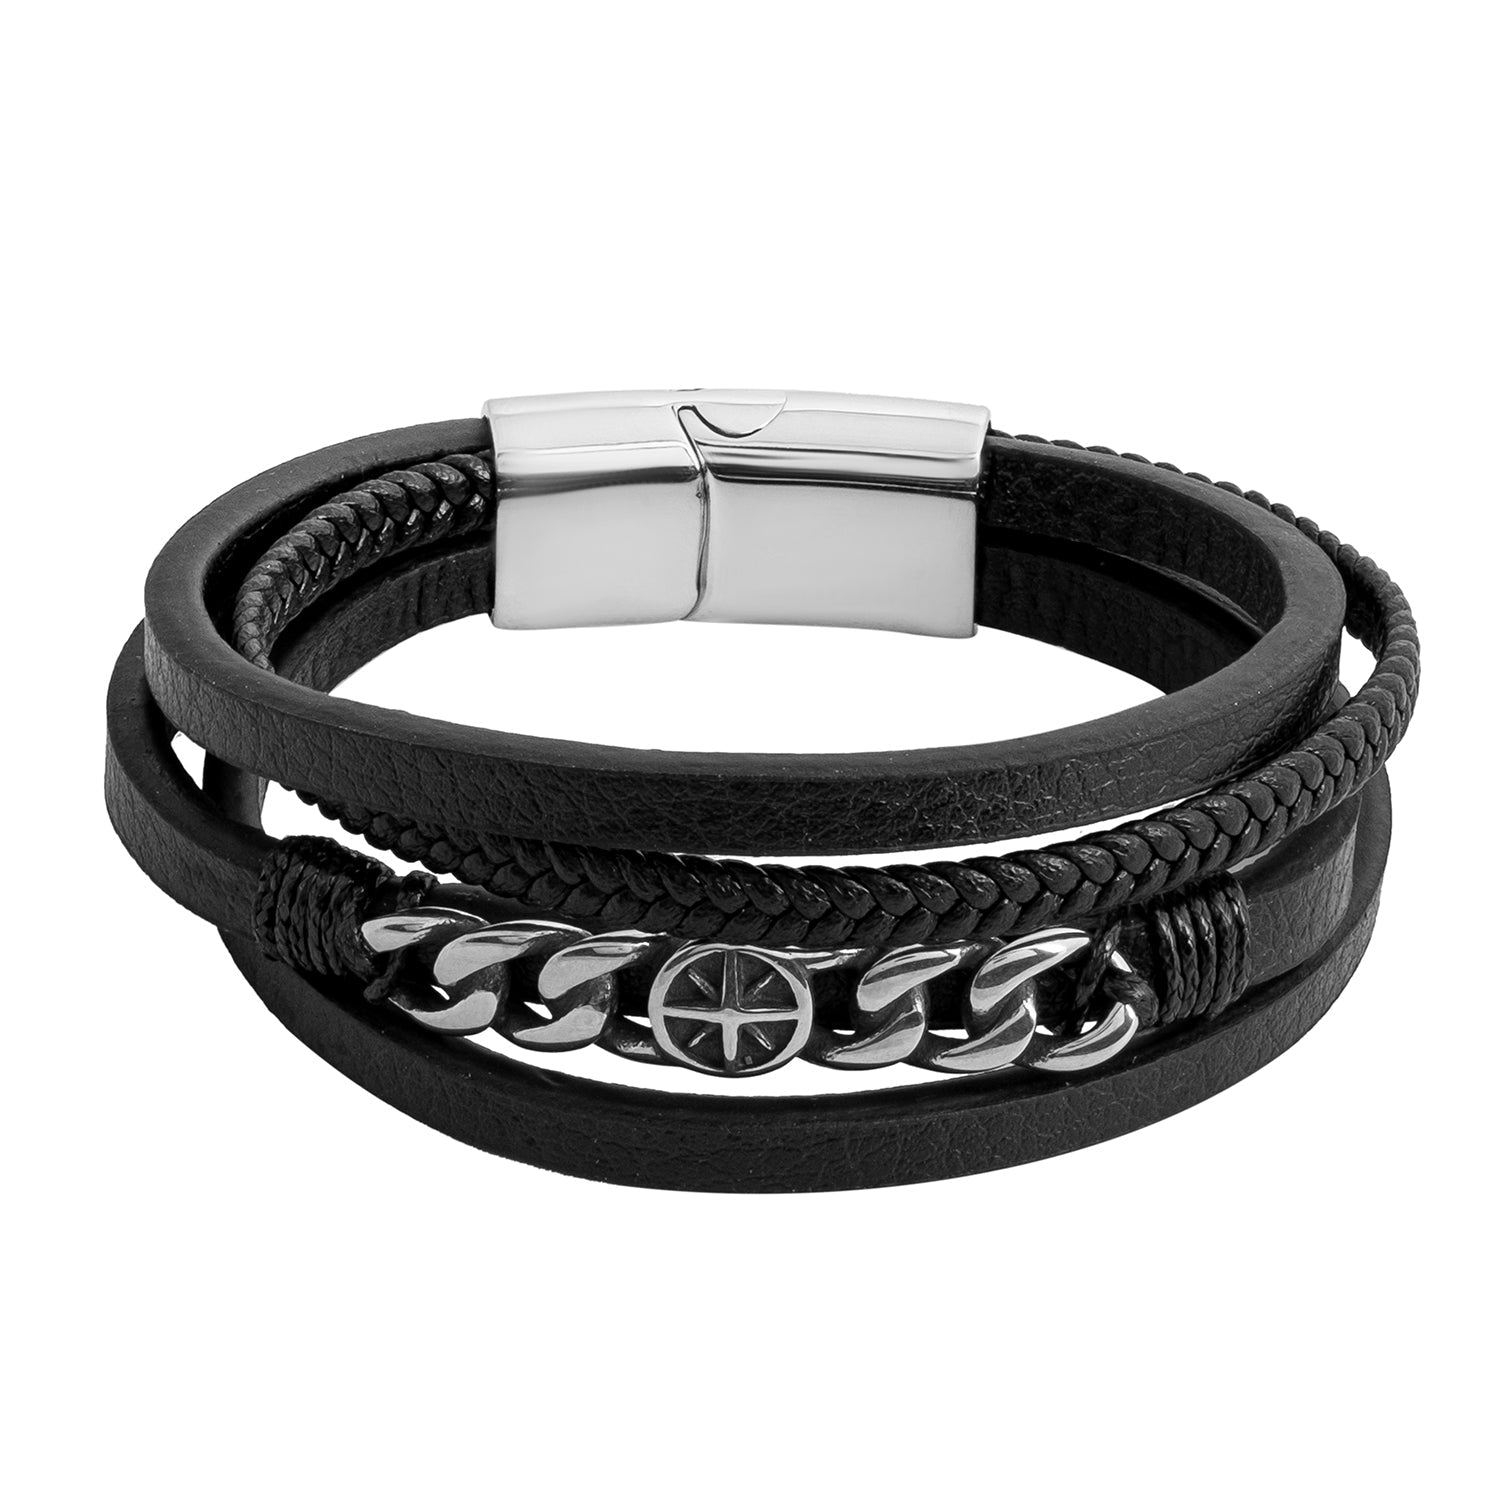 Mens Genuine Leather Braided Multilayer Cross Bracelet With Gold Stainless  Steel Bangle Cuff Wristband Will And Sandy Fashion Mens Jewelry From  Usdream, $4.66 | DHgate.Com